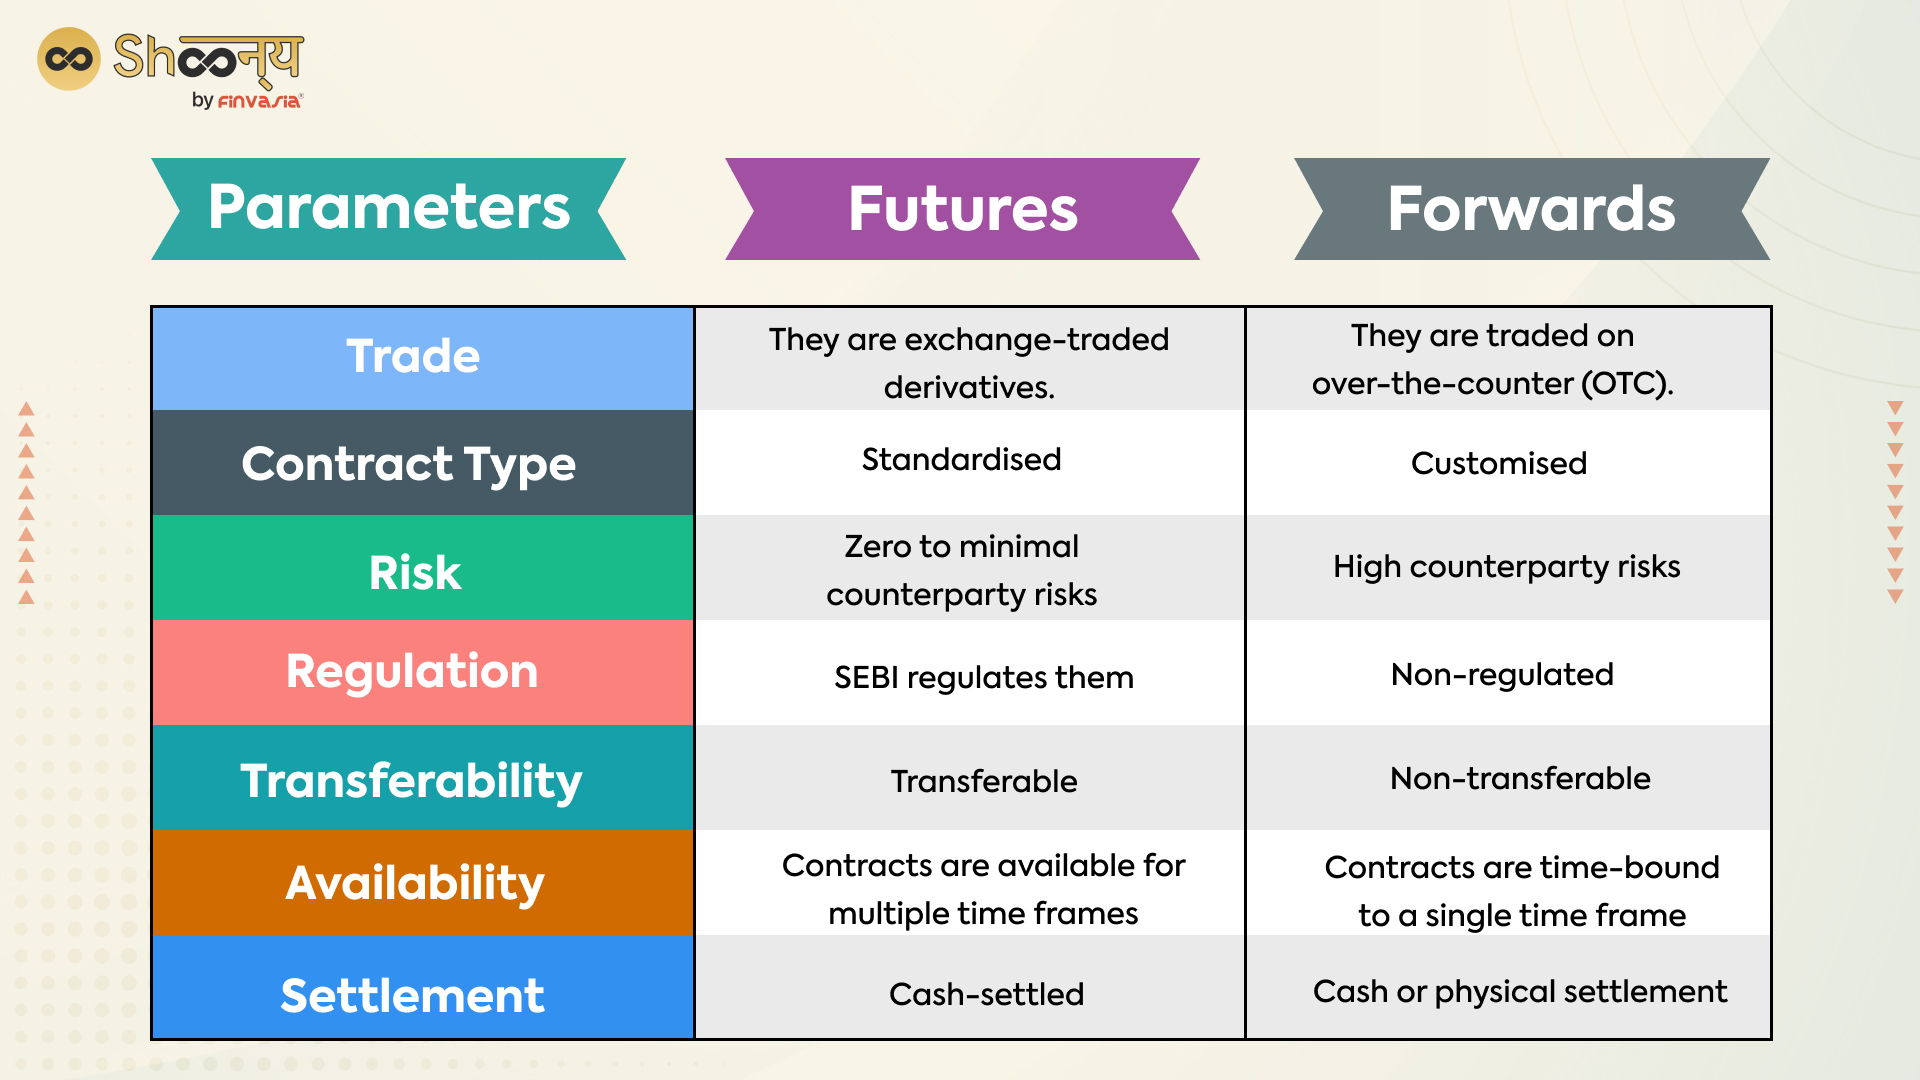 Comparison between Futures and Forwards